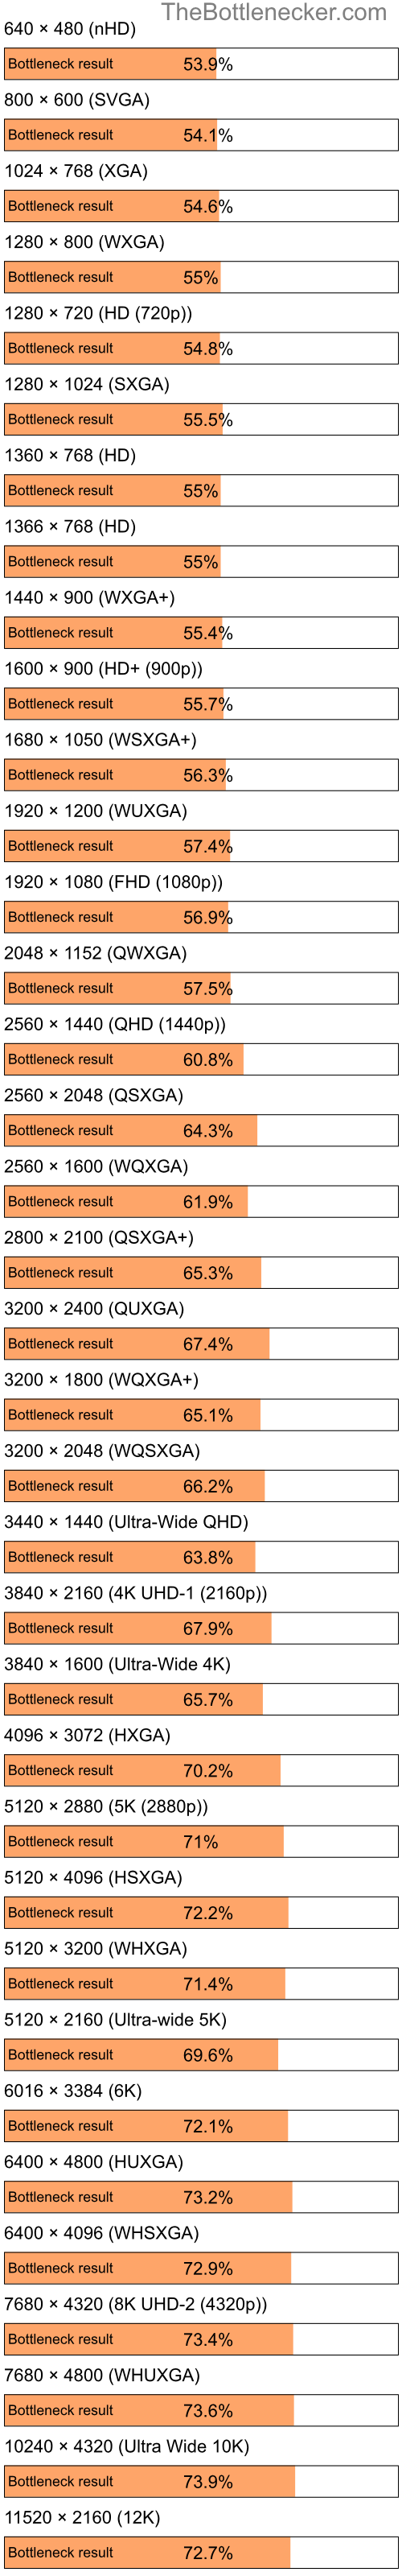 Bottleneck results by resolution for Intel Celeron and NVIDIA Quadro NVS 295 in Processor Intense Tasks